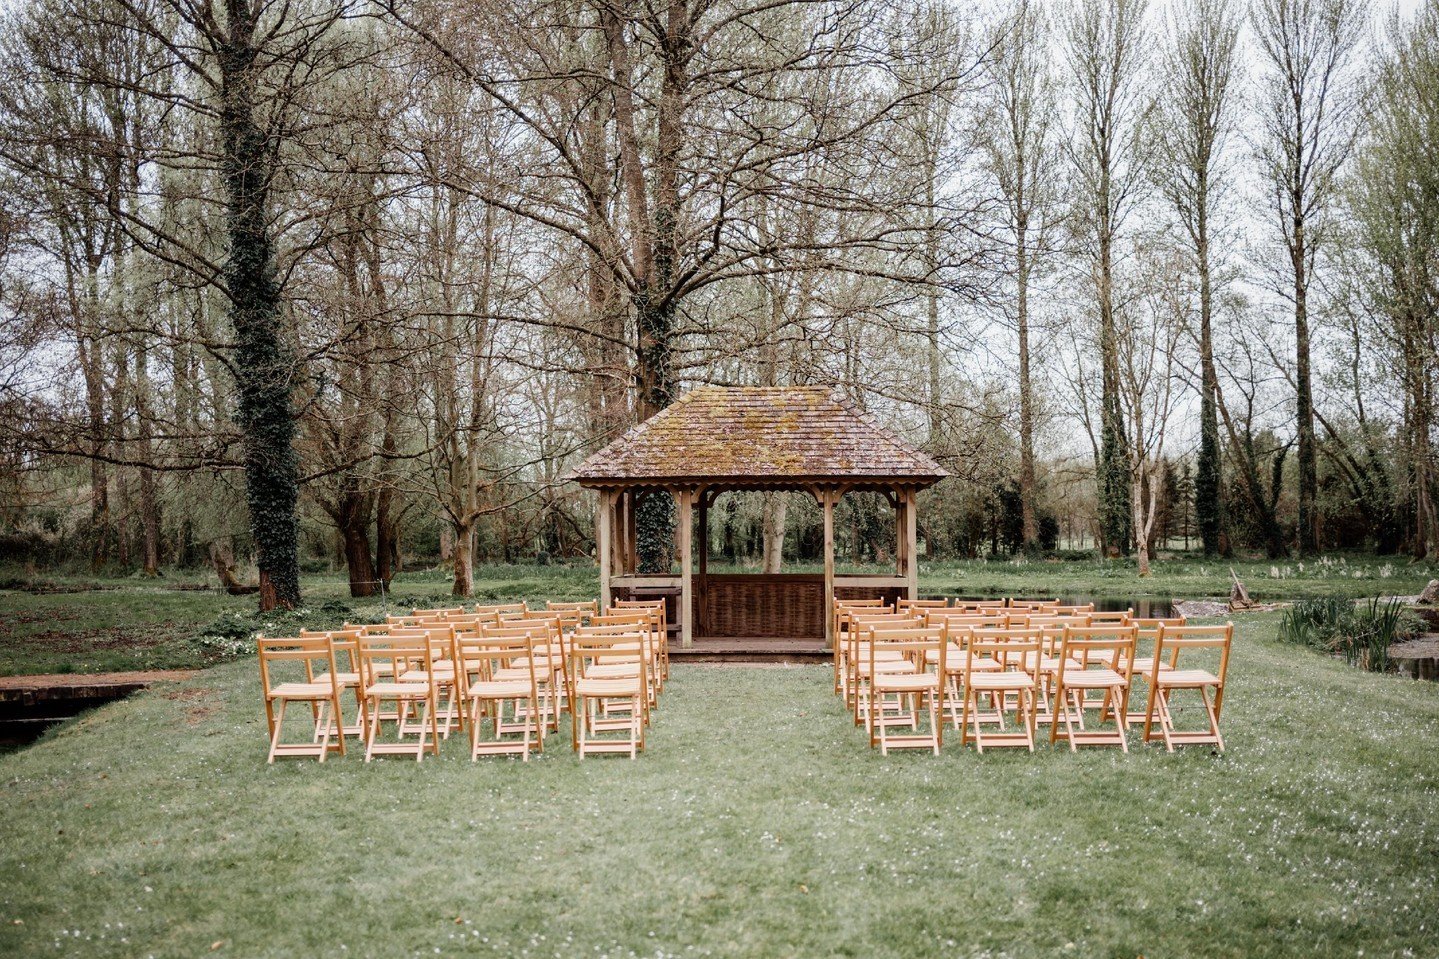 Our outdoor ceremony just waiting for you to dress and style however you feel. 

Images by @tomwyatt.co

Concept and Planning: @tomwyatt.co / @kirstygreat.photo Photography: @tomwyatt.co / @kirstygreat.photo
Venue: @watersedgewedding
On-the-day coord